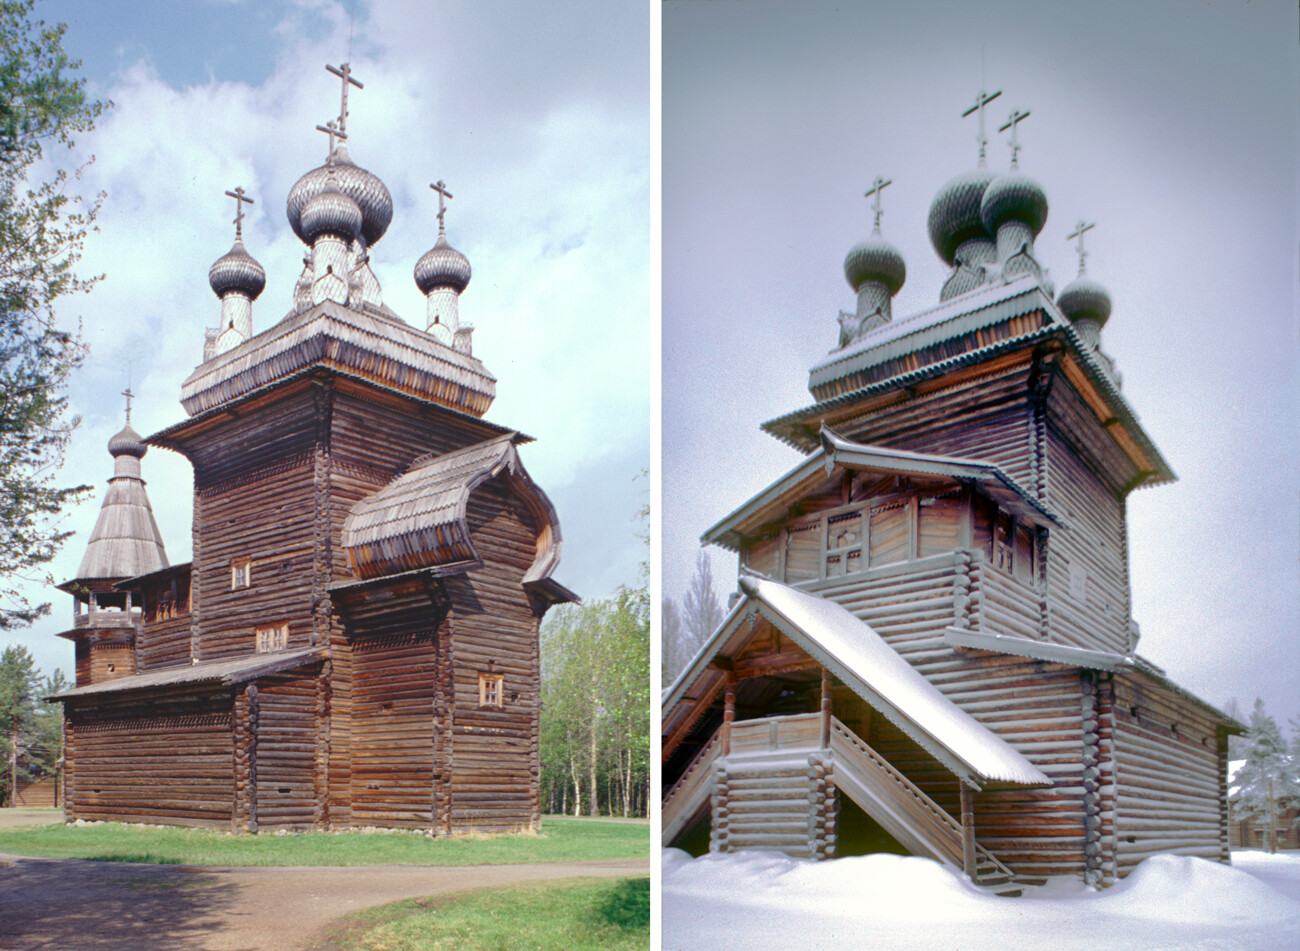 Log Church of the Ascension, originally built at Kushereka village, Onega District. Left: Southeast view with apse containing main altar on right. June 9, 1998.
Right: Southwest view with vestibule. December 30, 1998